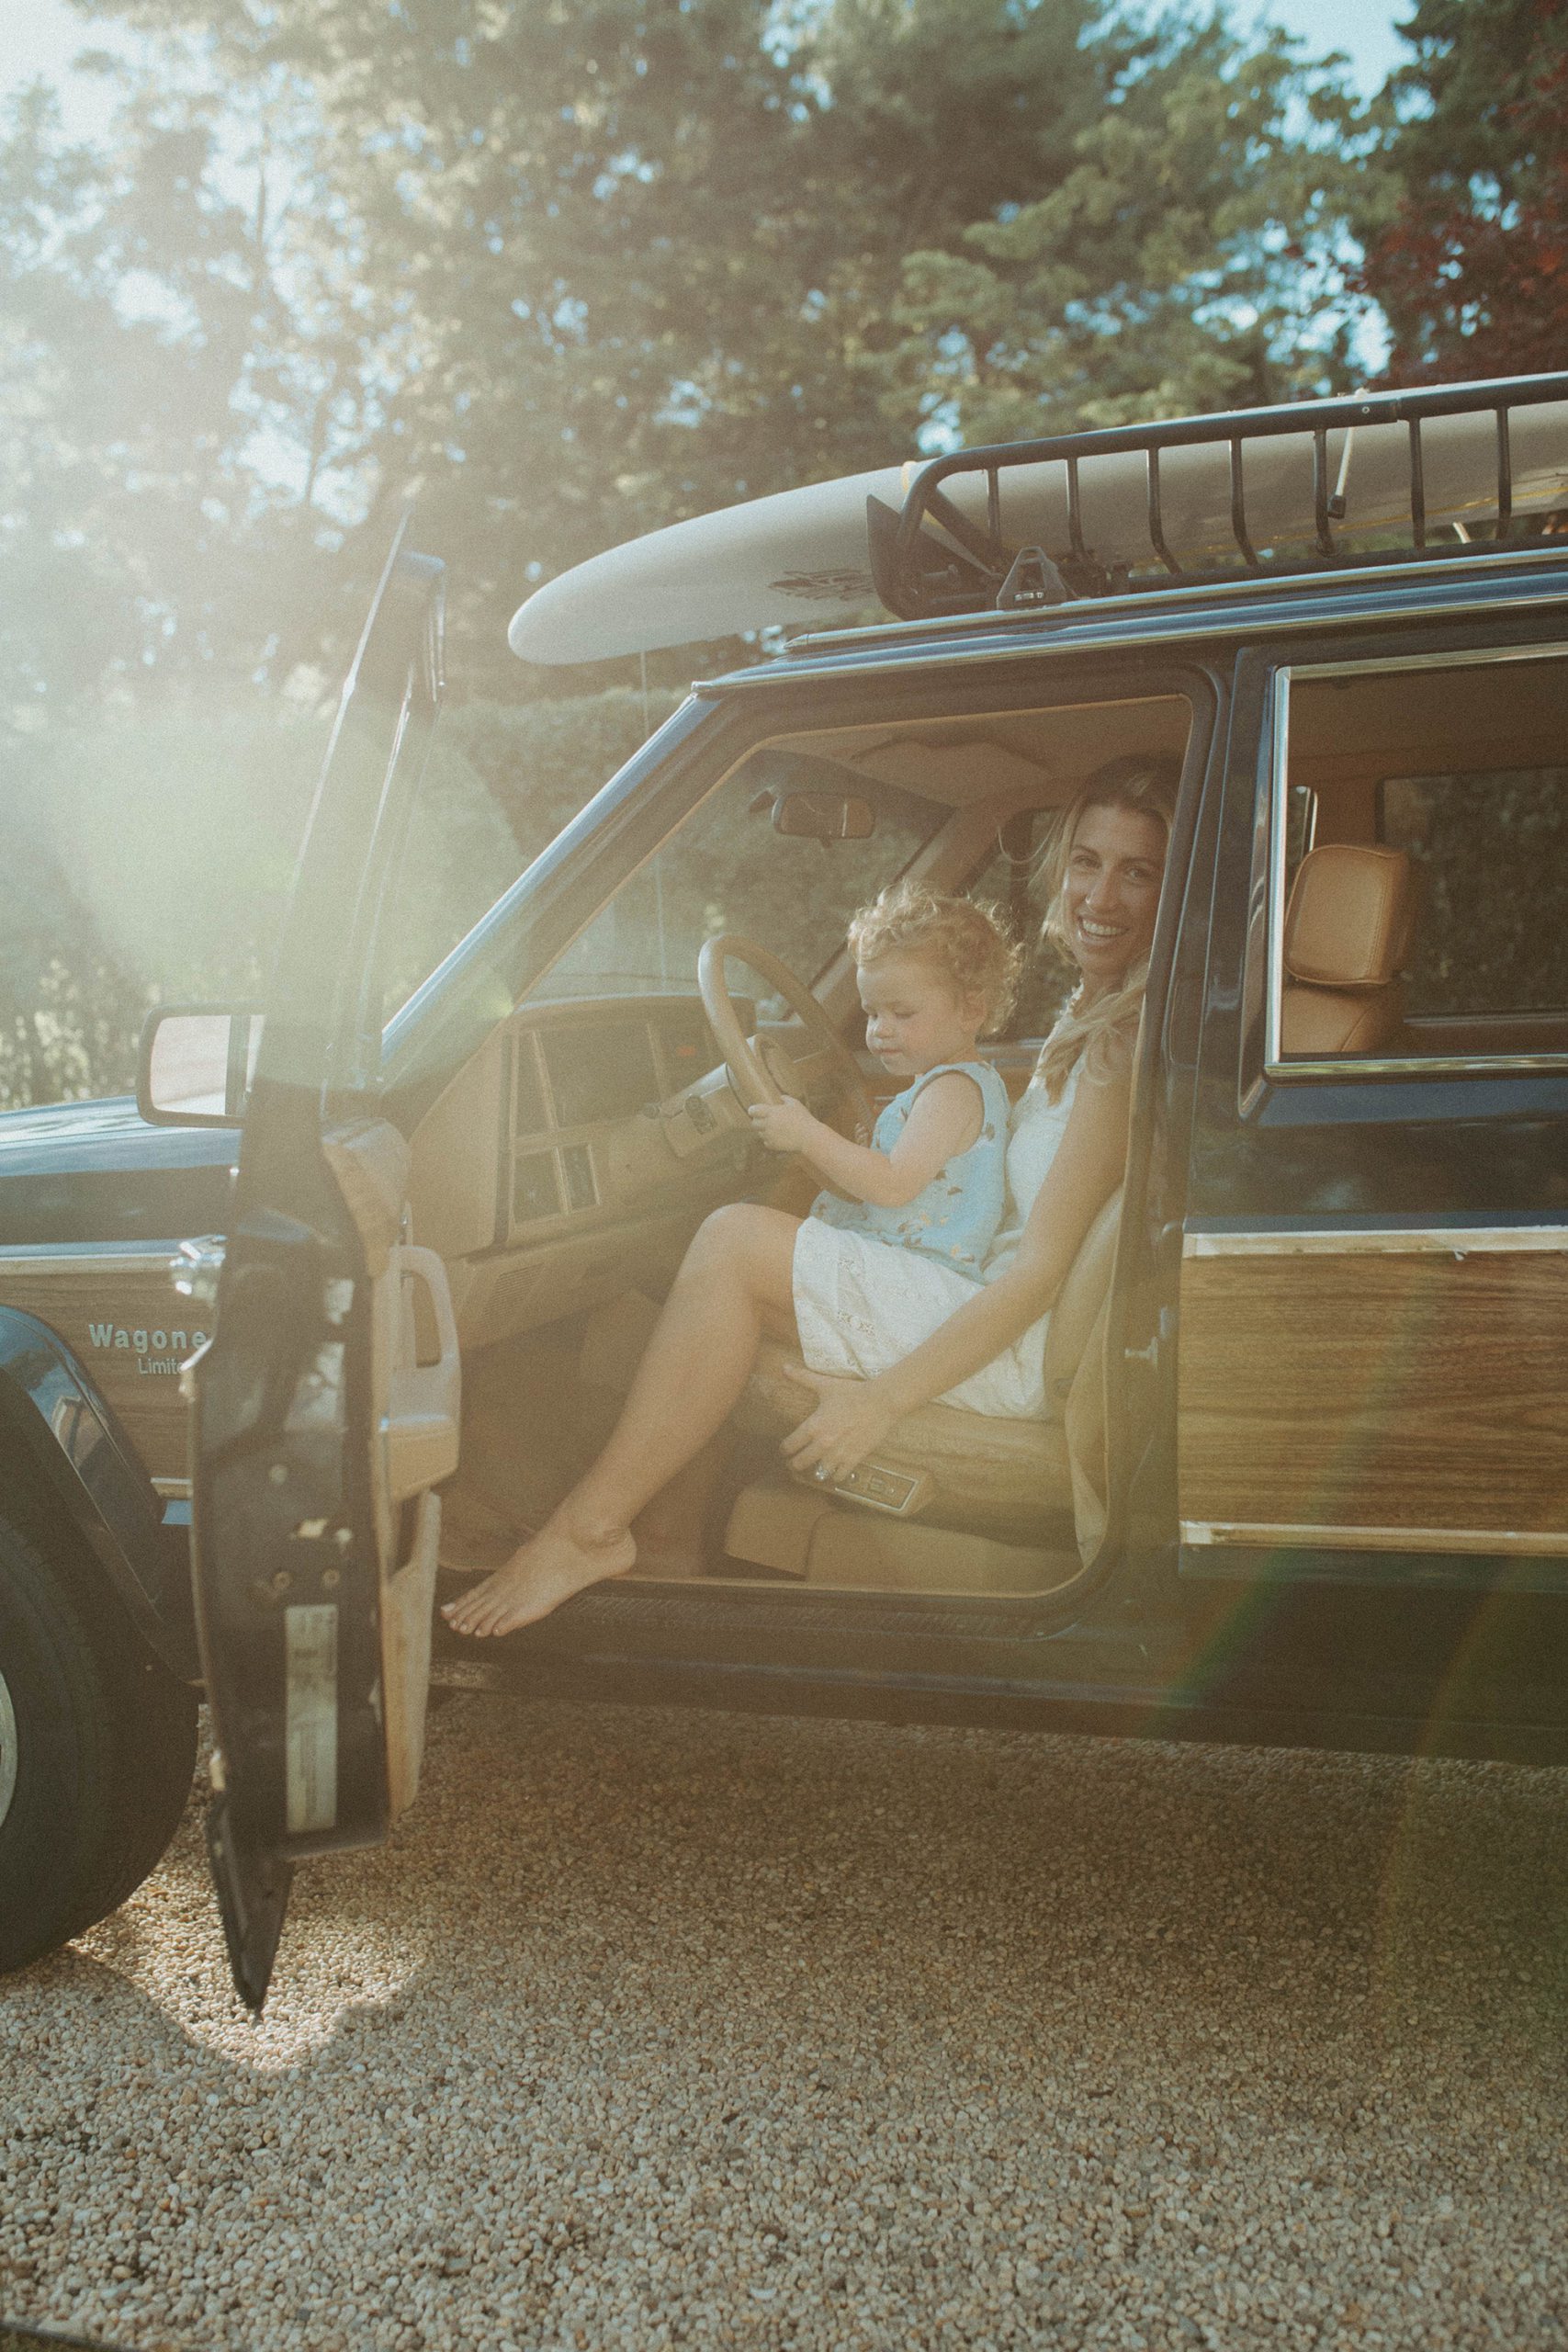 golden hour light, New England mom and baby family photoshoot in the front seat of their wood paneled jeep wagoneer with a surfboard on top in the summertime, Long Island family photographer